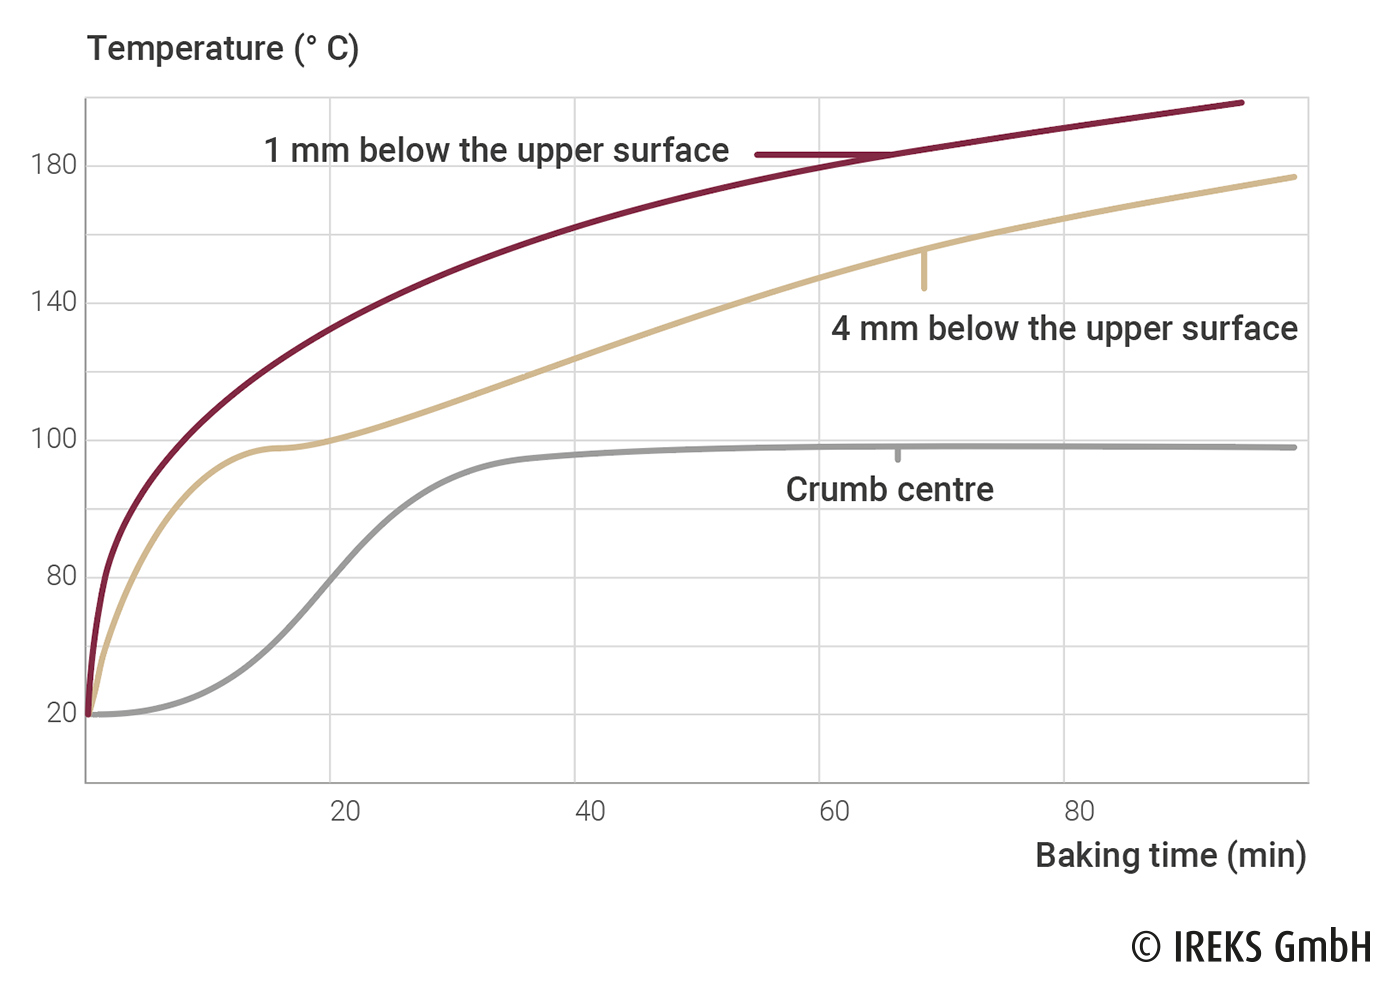 Temperature profile of the center of the crumb and under the baked bakery surface 